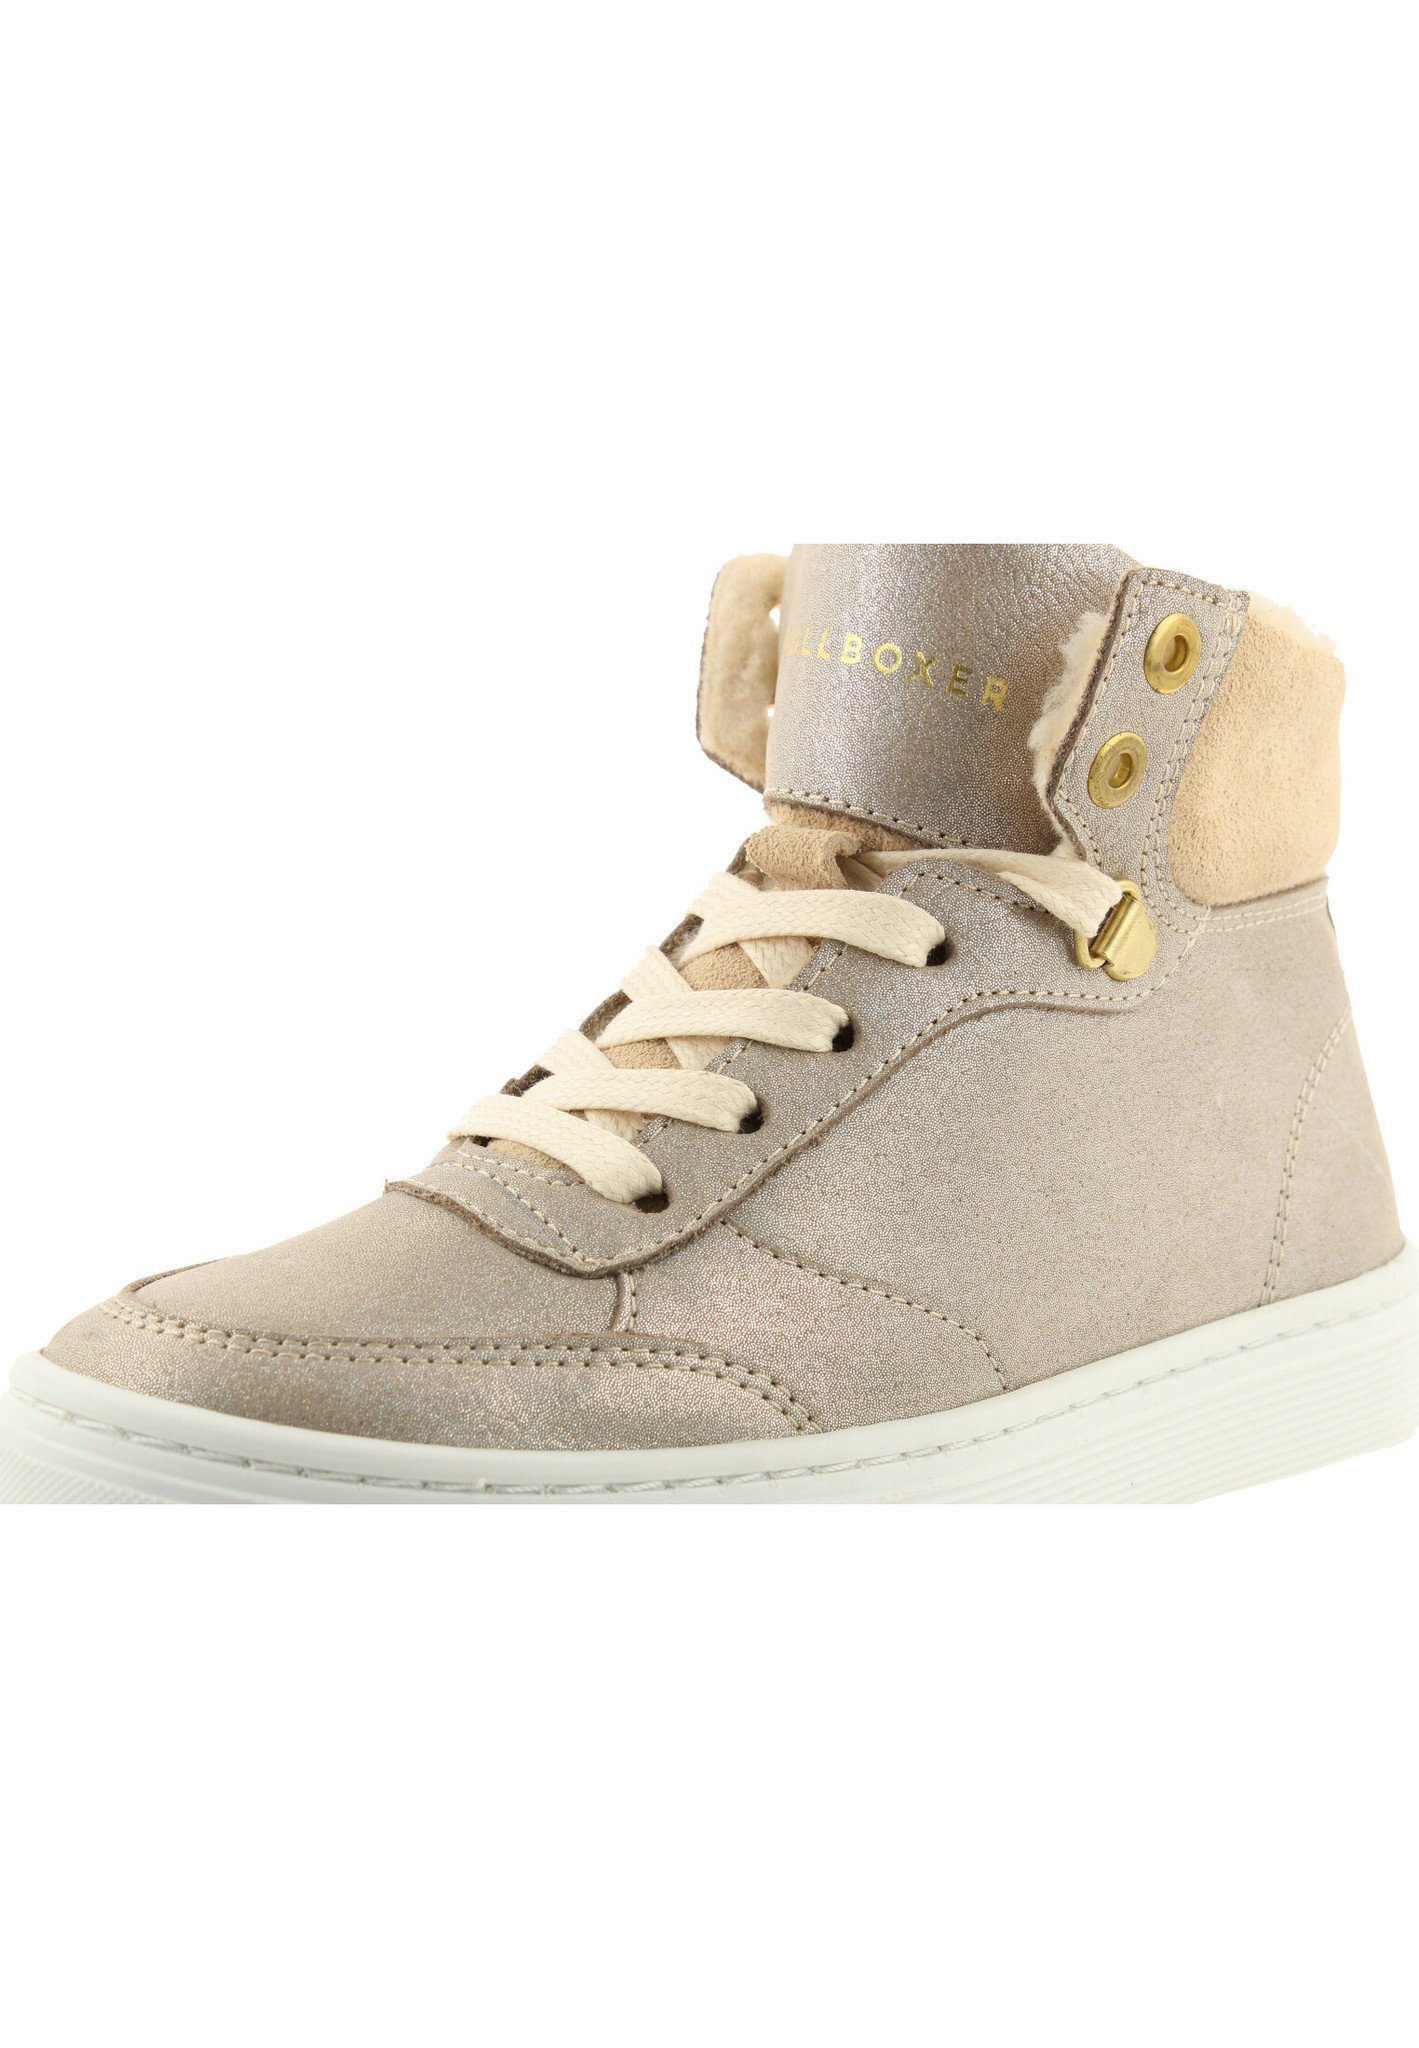 Louis Vuitton Off White Monogram Suede And Leather Cliff Top Wedge